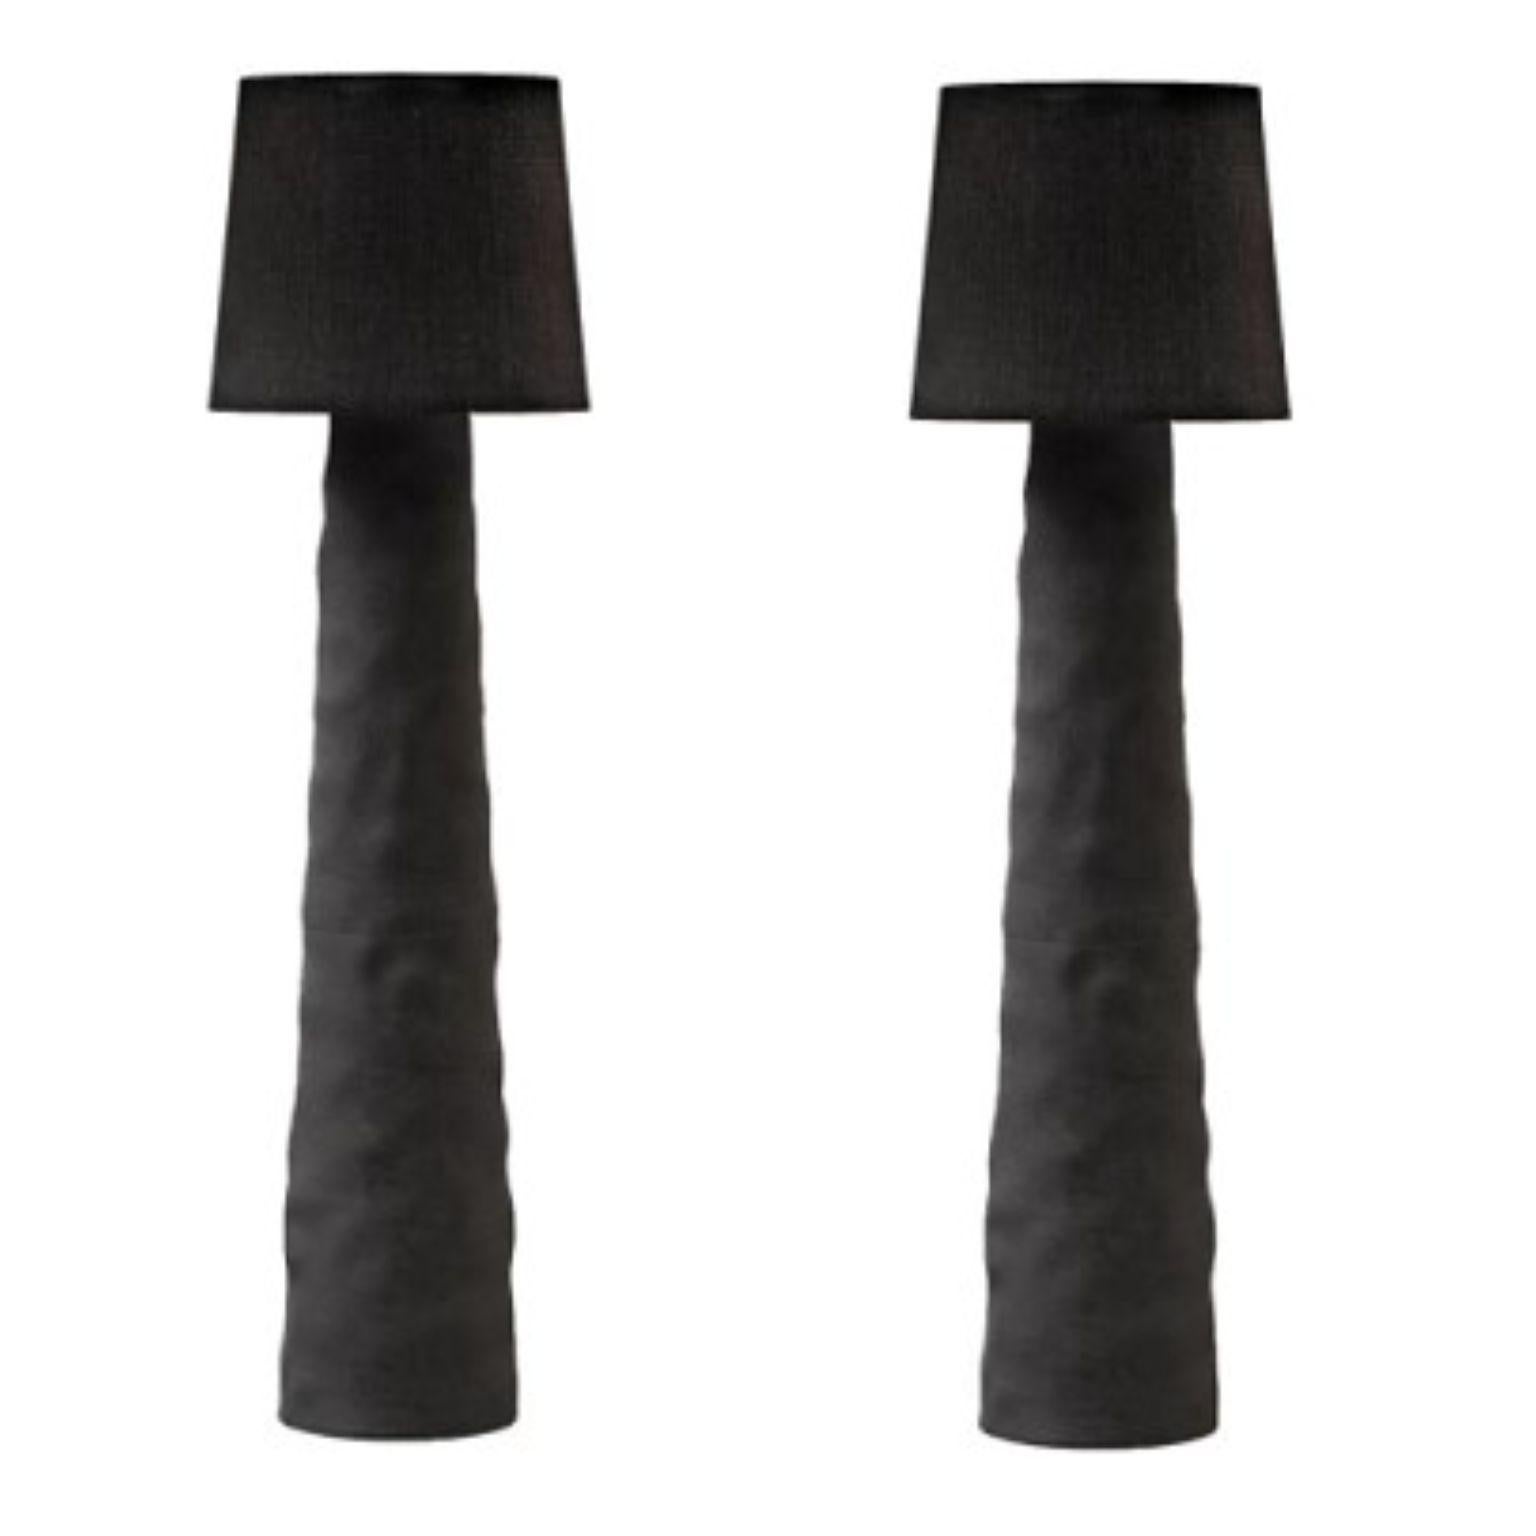 Set of 2 Sculpted Clay Floor Lamps by Faina
Design: Victoriya Yakusha
Material: clay, wood (ash)
Dimensions: 170 x 50 x 50 cm
Weight: 63 kilos.

*All our lamps can be wired according to each country. If sold to the USA it will be wired for the